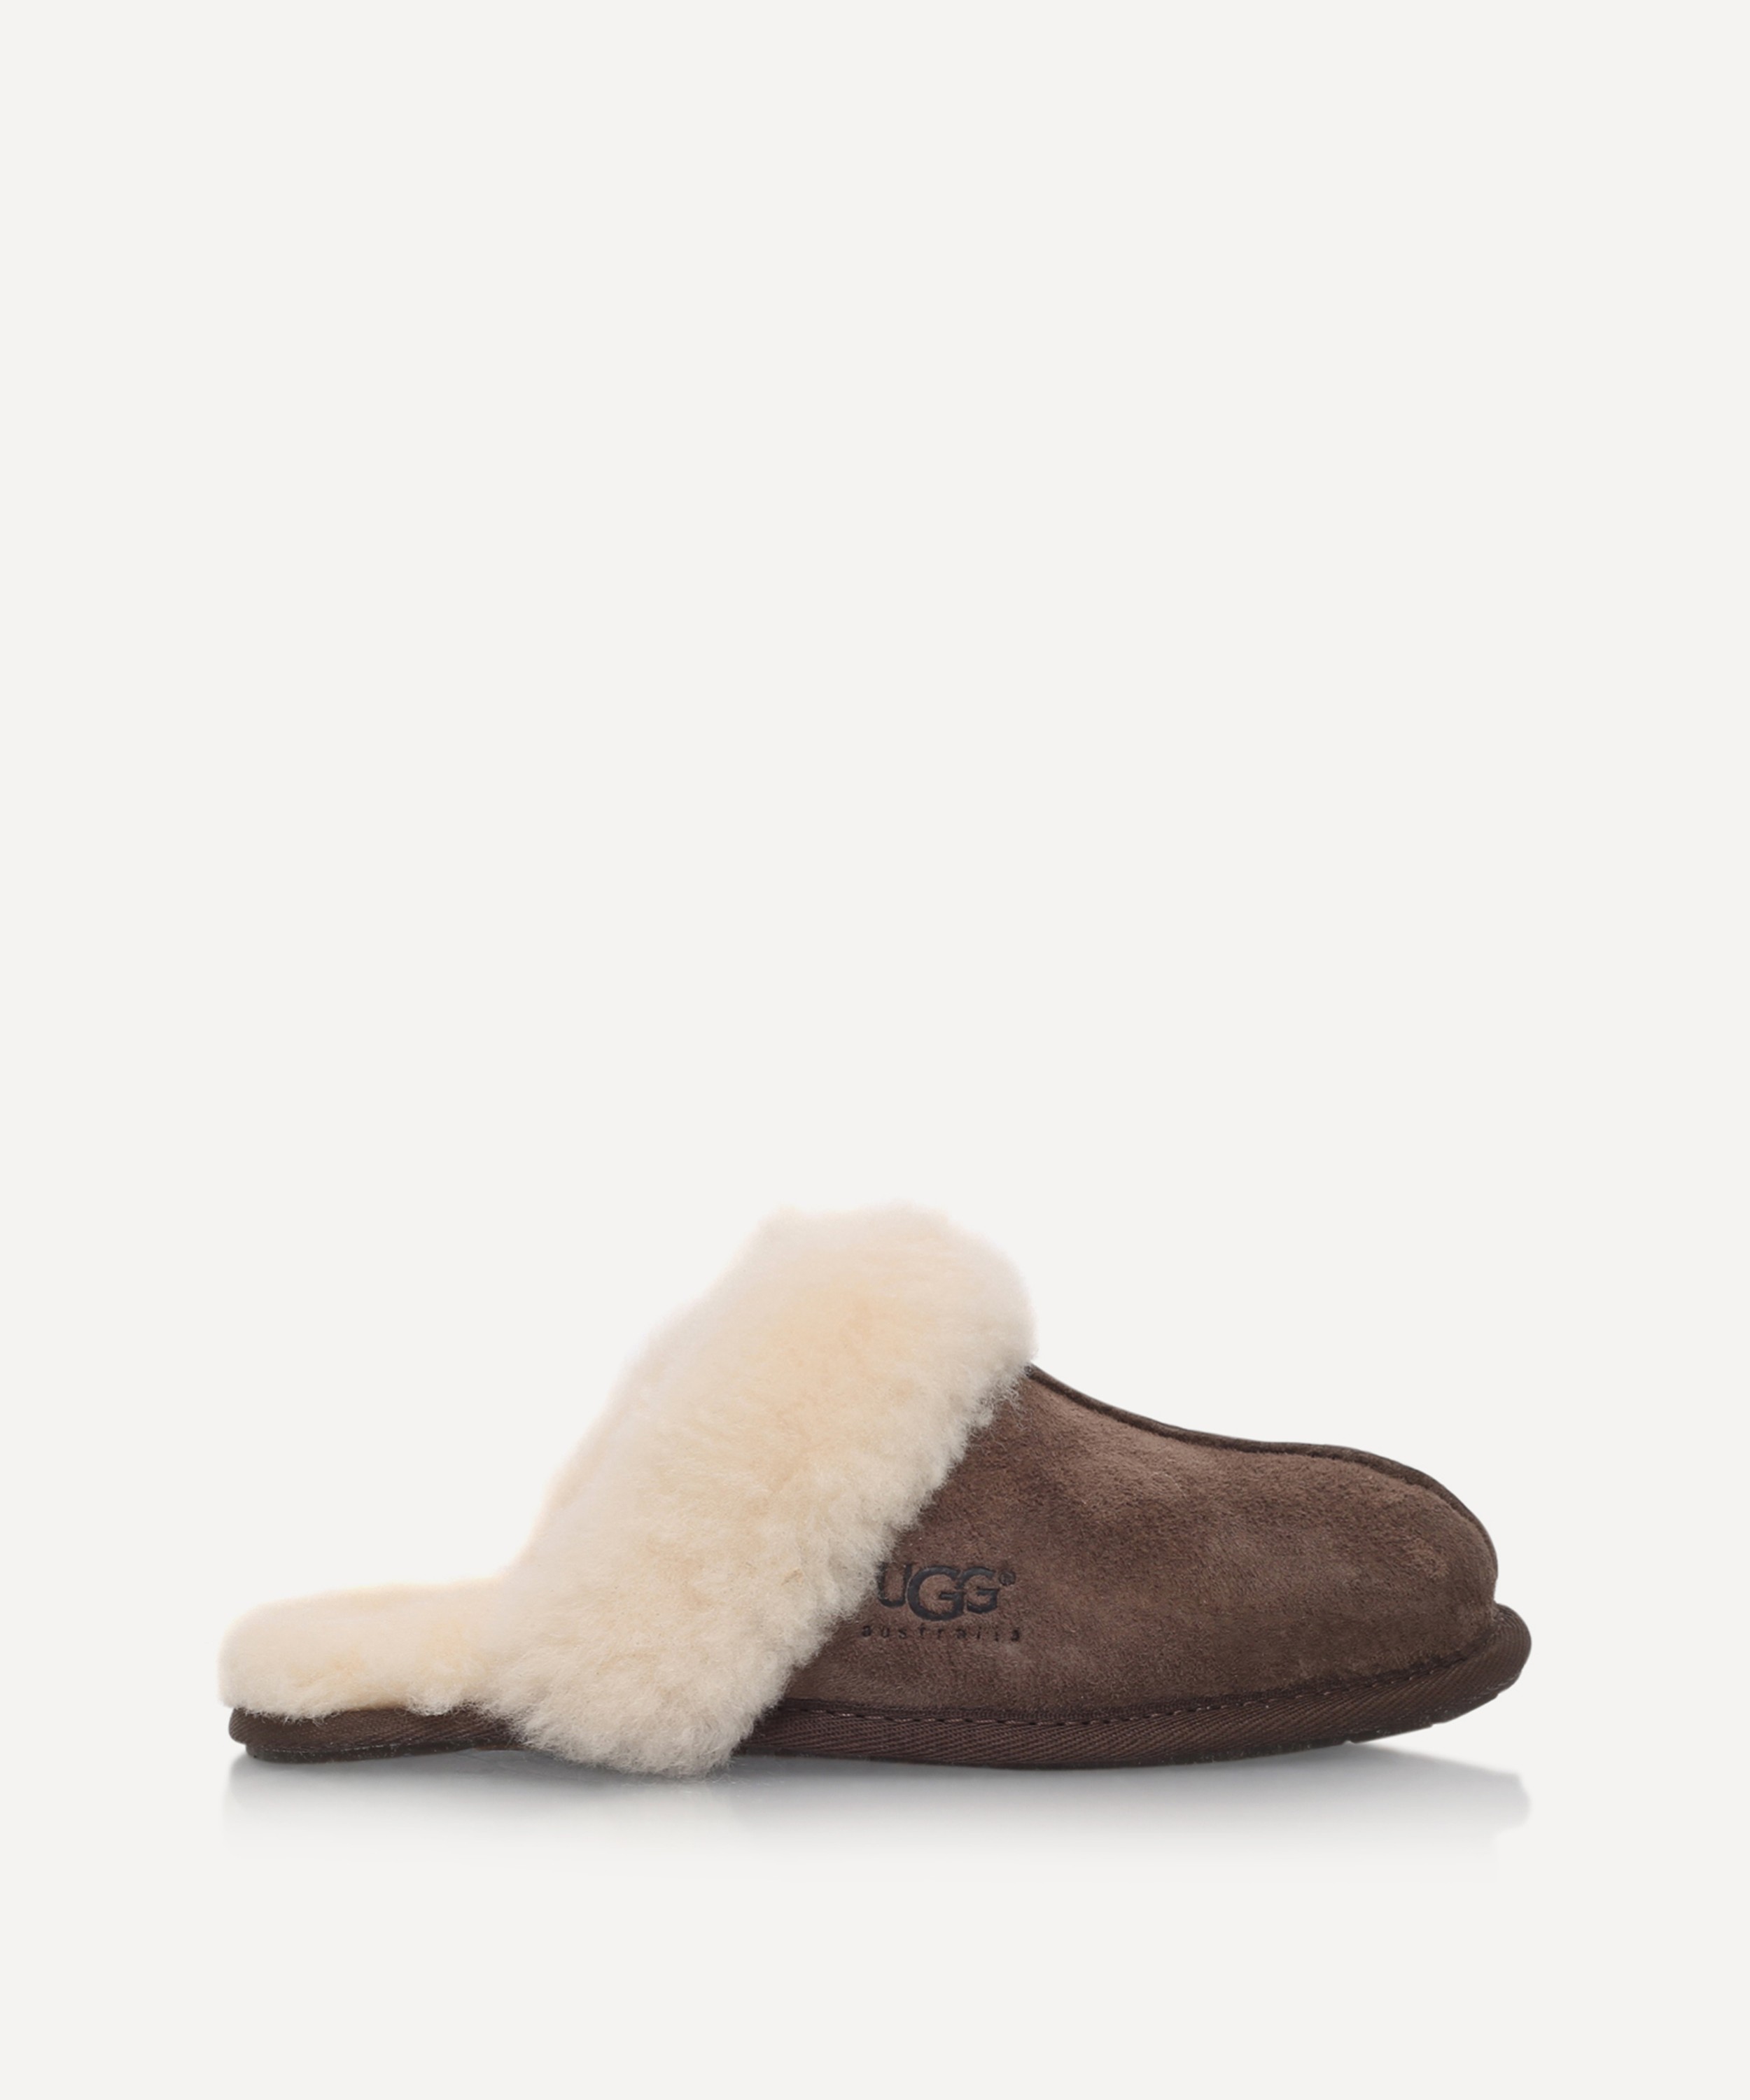 Ugg - Scuffette II Slippers image number 4